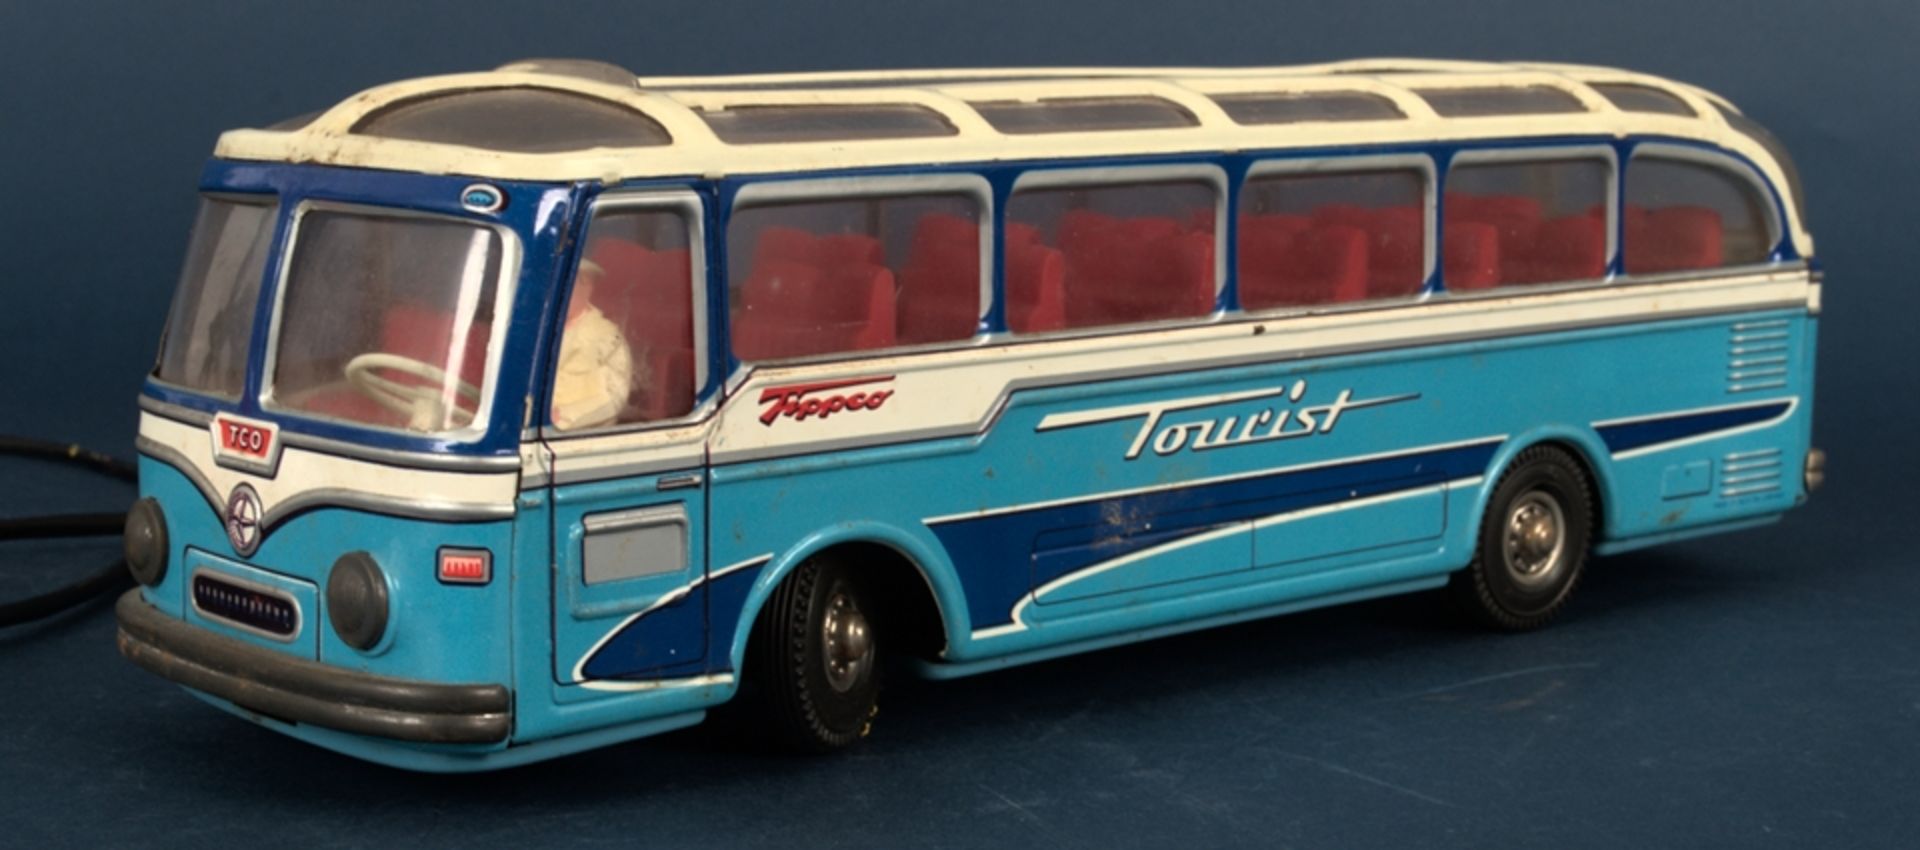 TOURIST - "TIPPCO" Bus, lithographierter Dekor, Blech, Mitte 20. Jhd., Made in - Image 8 of 15